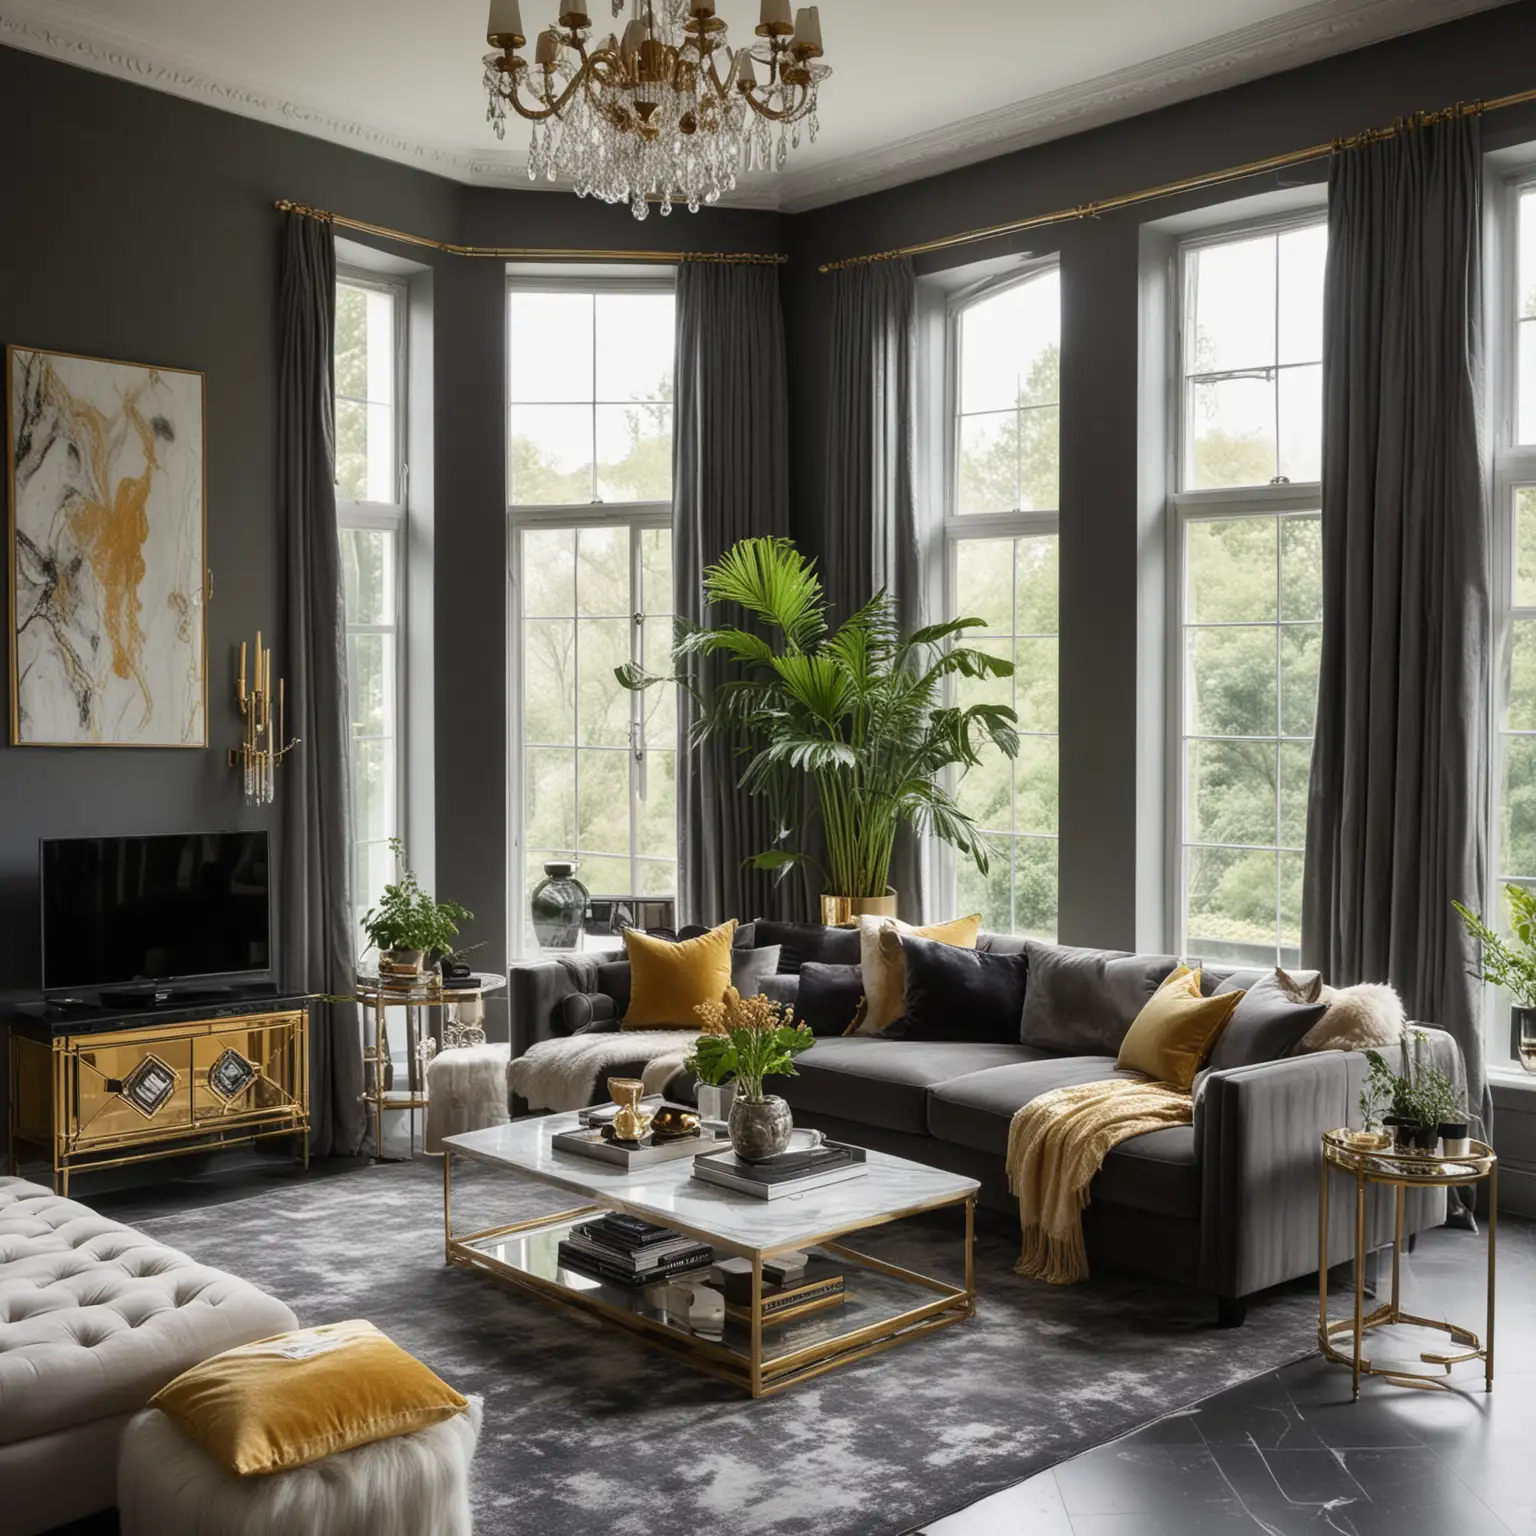 a dutch angle shot of A sophisticated living room with dark grey walls, large panoramic windows, and marble flooring. Incorporate a plush velvet sofa with gold and cream throw pillows, a glass coffee table with gold accents, and a high-pile rug. Add a wall-mounted flat-screen TV, gold-framed wall mirrors, elegant crystal chandeliers, a few large potted plants in stylish planters, a gold-accented bar cart, crystal vases, a couple of abstract sculptures, and a state-of-the-art sound system.